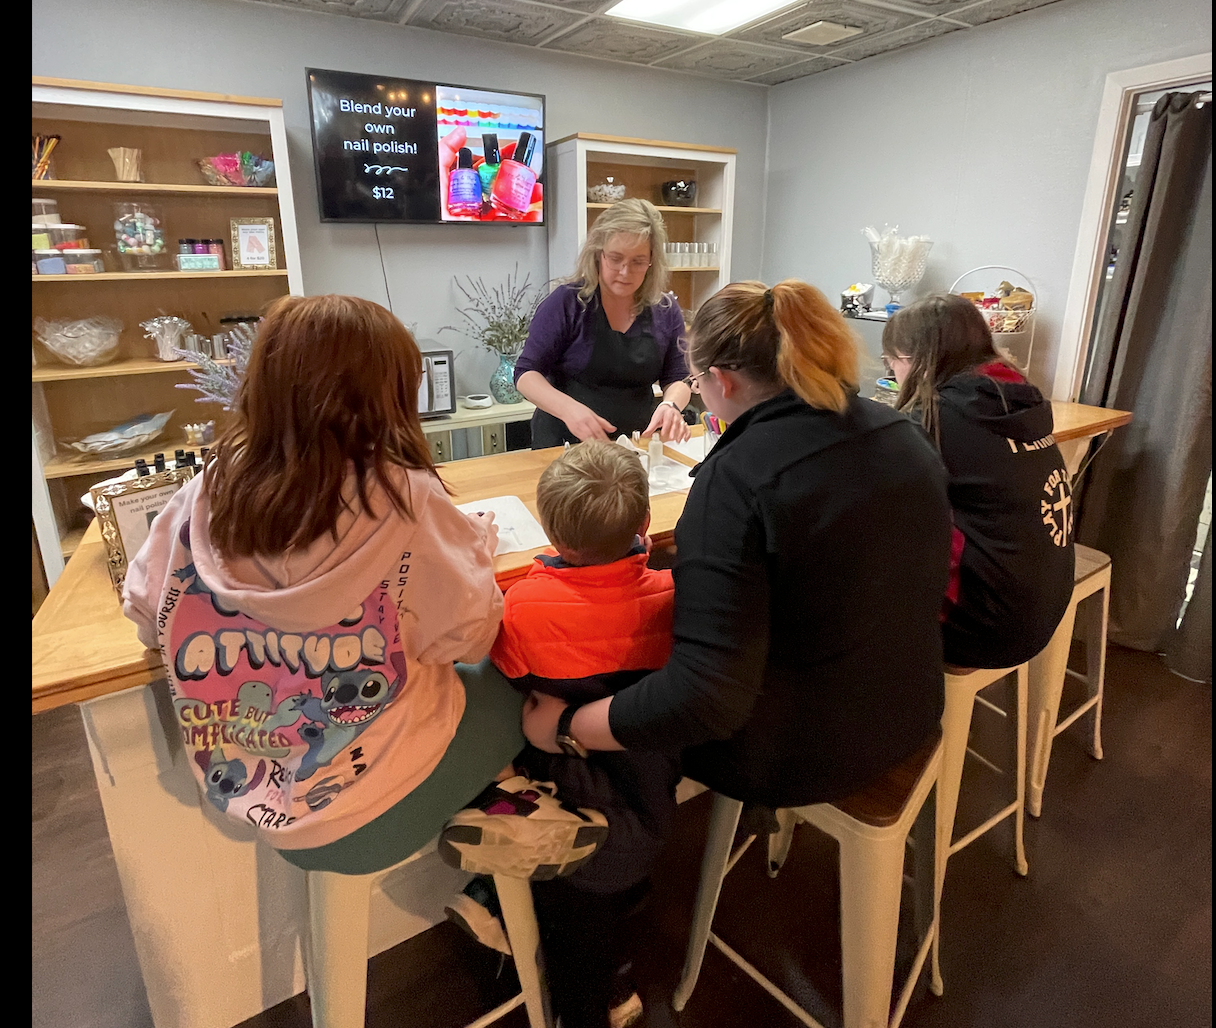 Owner Layla Obregon is working with DIY makers at her downtown Menomonee Falls business, Poppy &Thyme. In Poppy & Thyme's expanded space, people can come in to create personalized scented candles, wax melts, perfumes and nail polish.